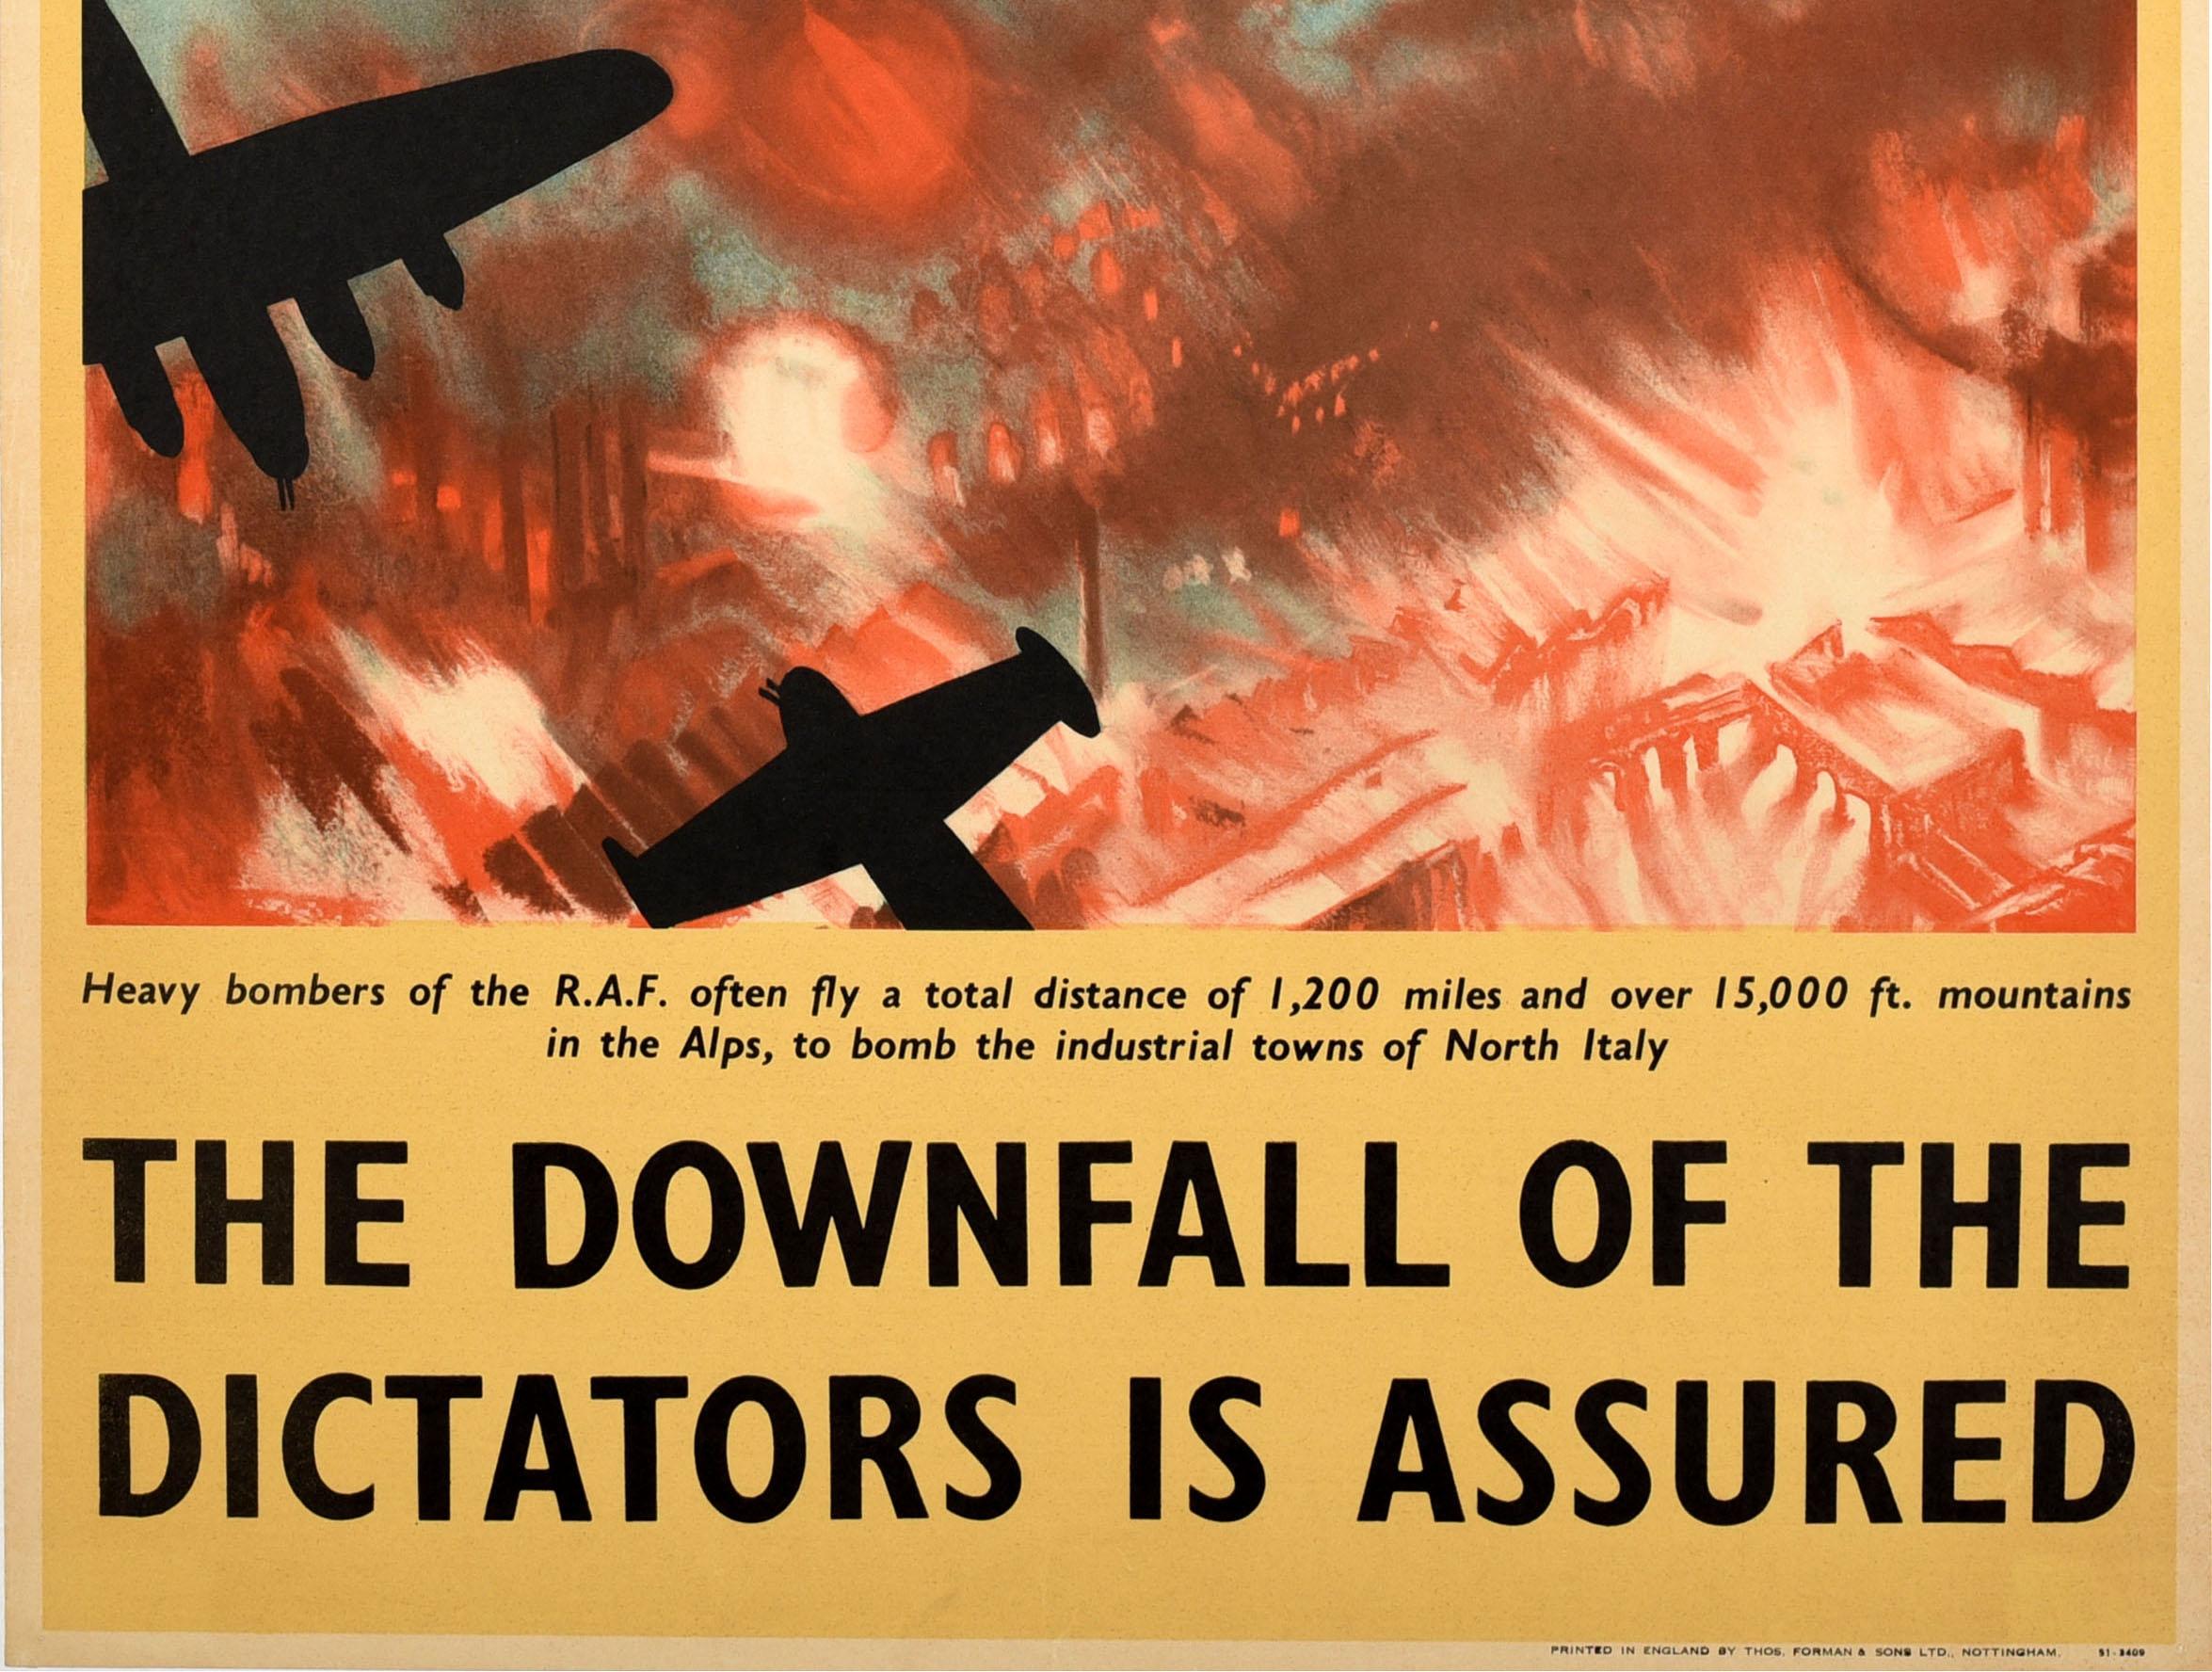 Original vintage World War Two poster - Heavy bombers of the RAF often fly a total distance of 1,200 miles and over 15,000 ft mountains in the Alps, to bomb the industrial towns of North Italy The Downfall of the Dictators is Assured - featuring